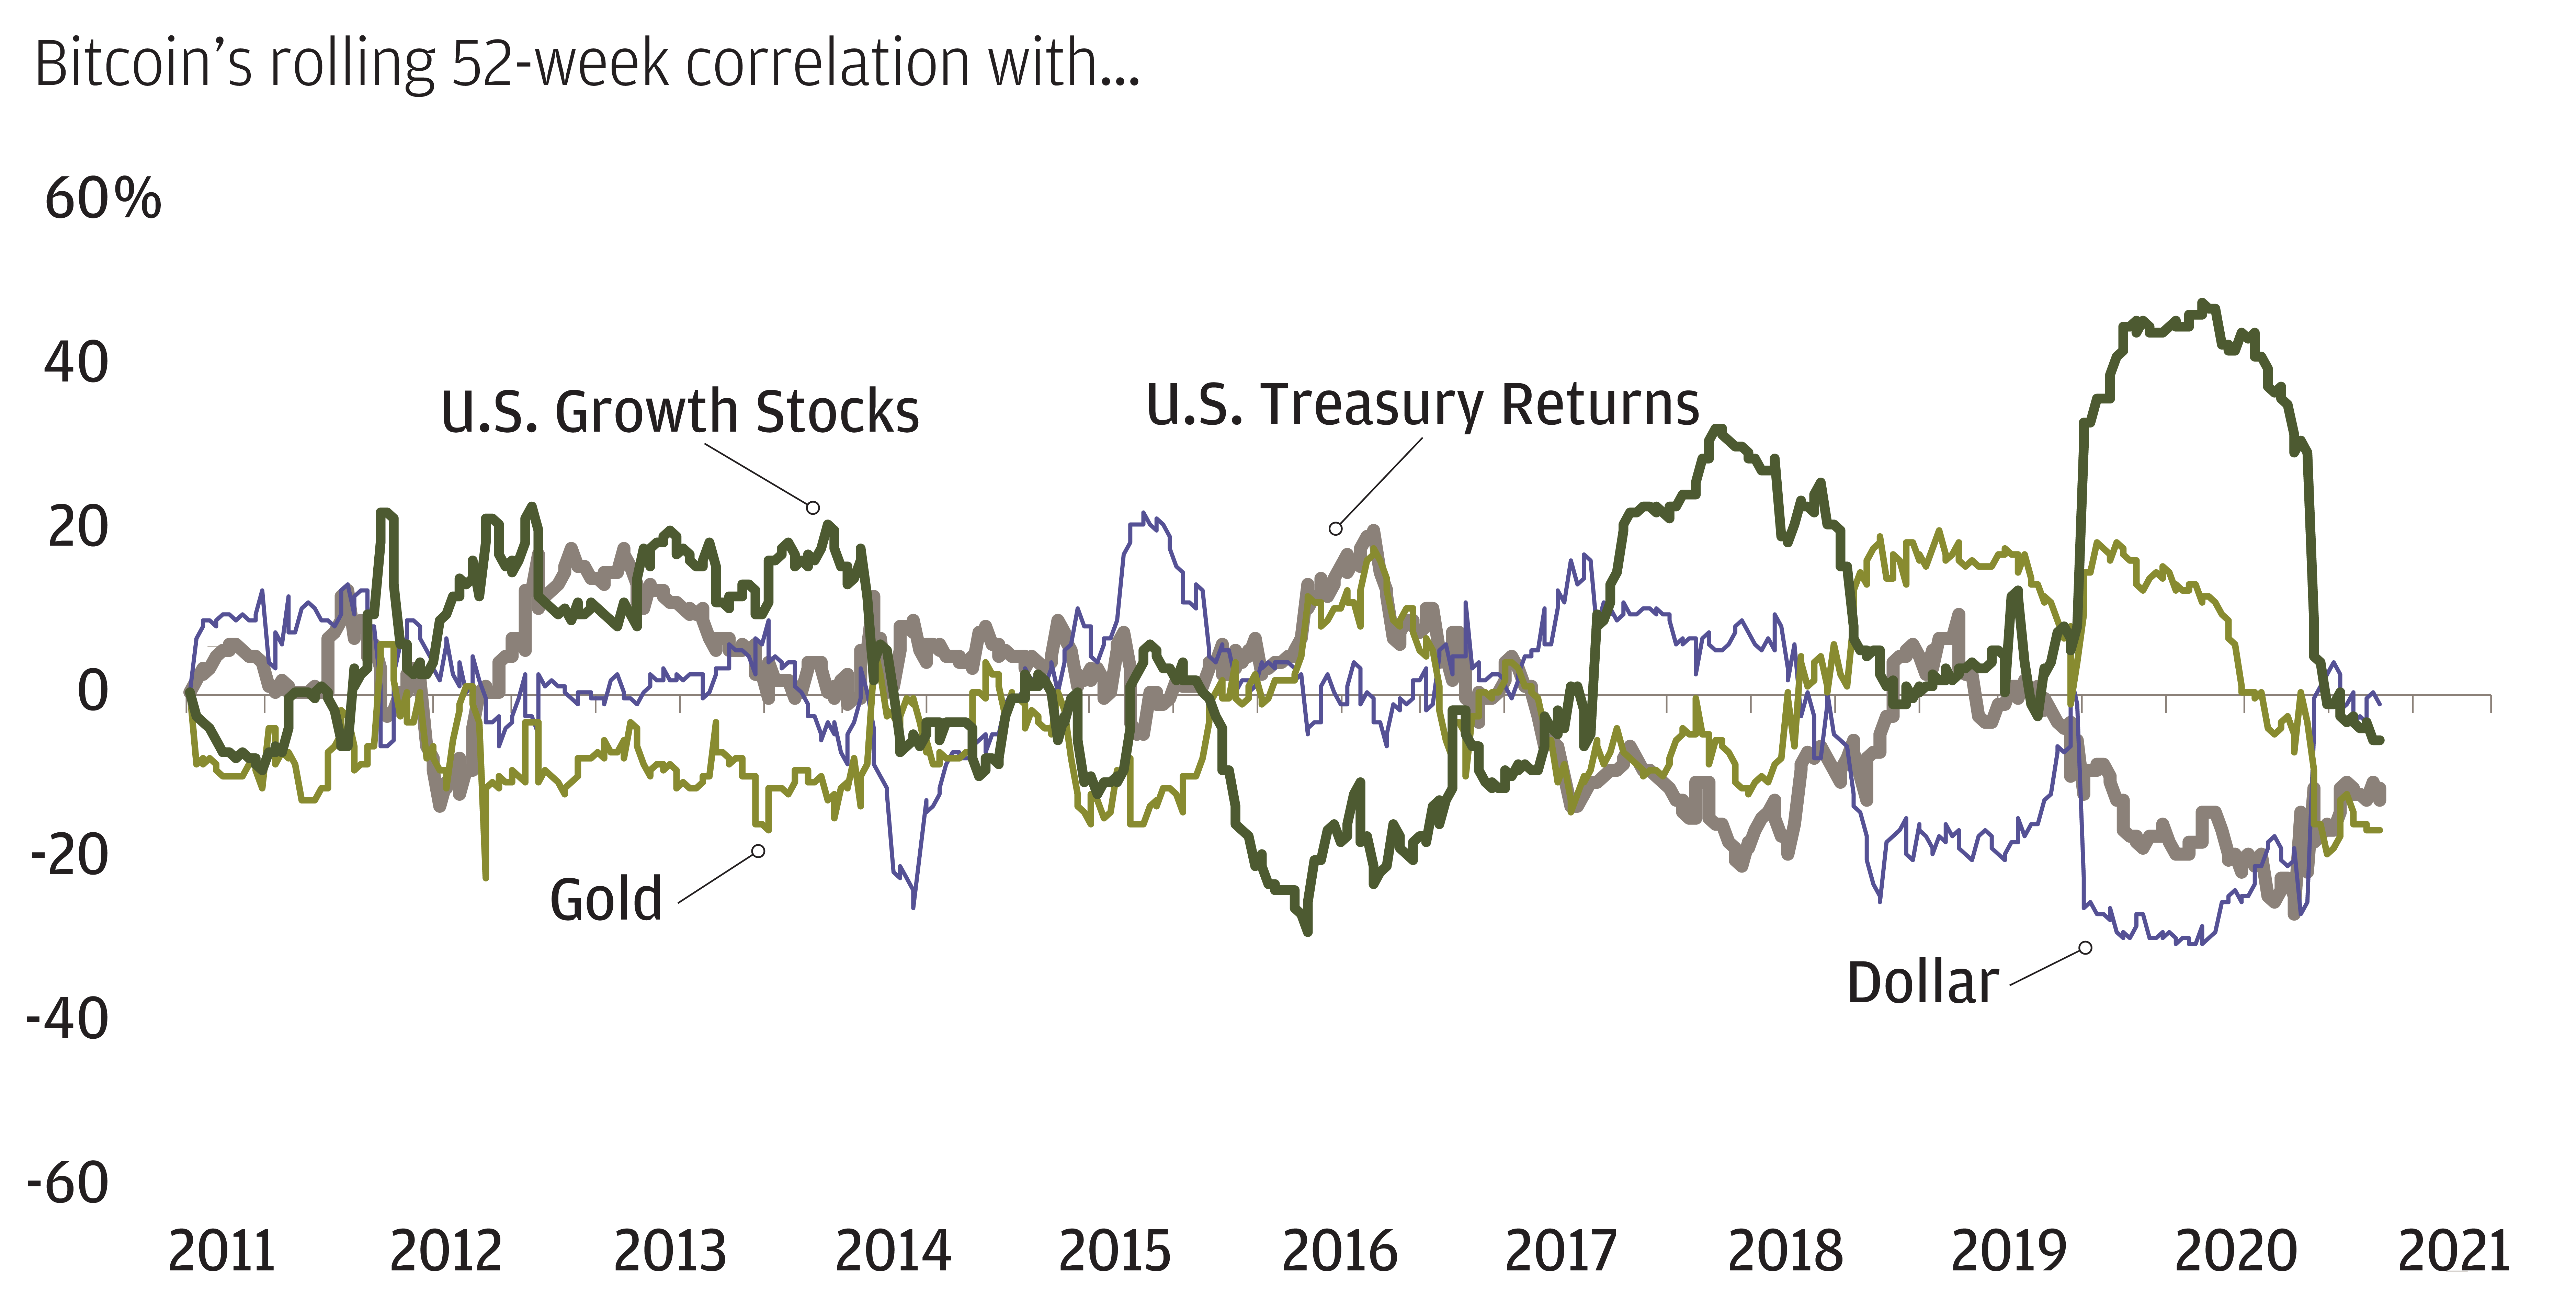 This chart shows rolling 52-week correlations between Bitcoin and gold, the dollar, U.S. Treasury returns and U.S. growth stocks. The correlations are very inconsistent over time.